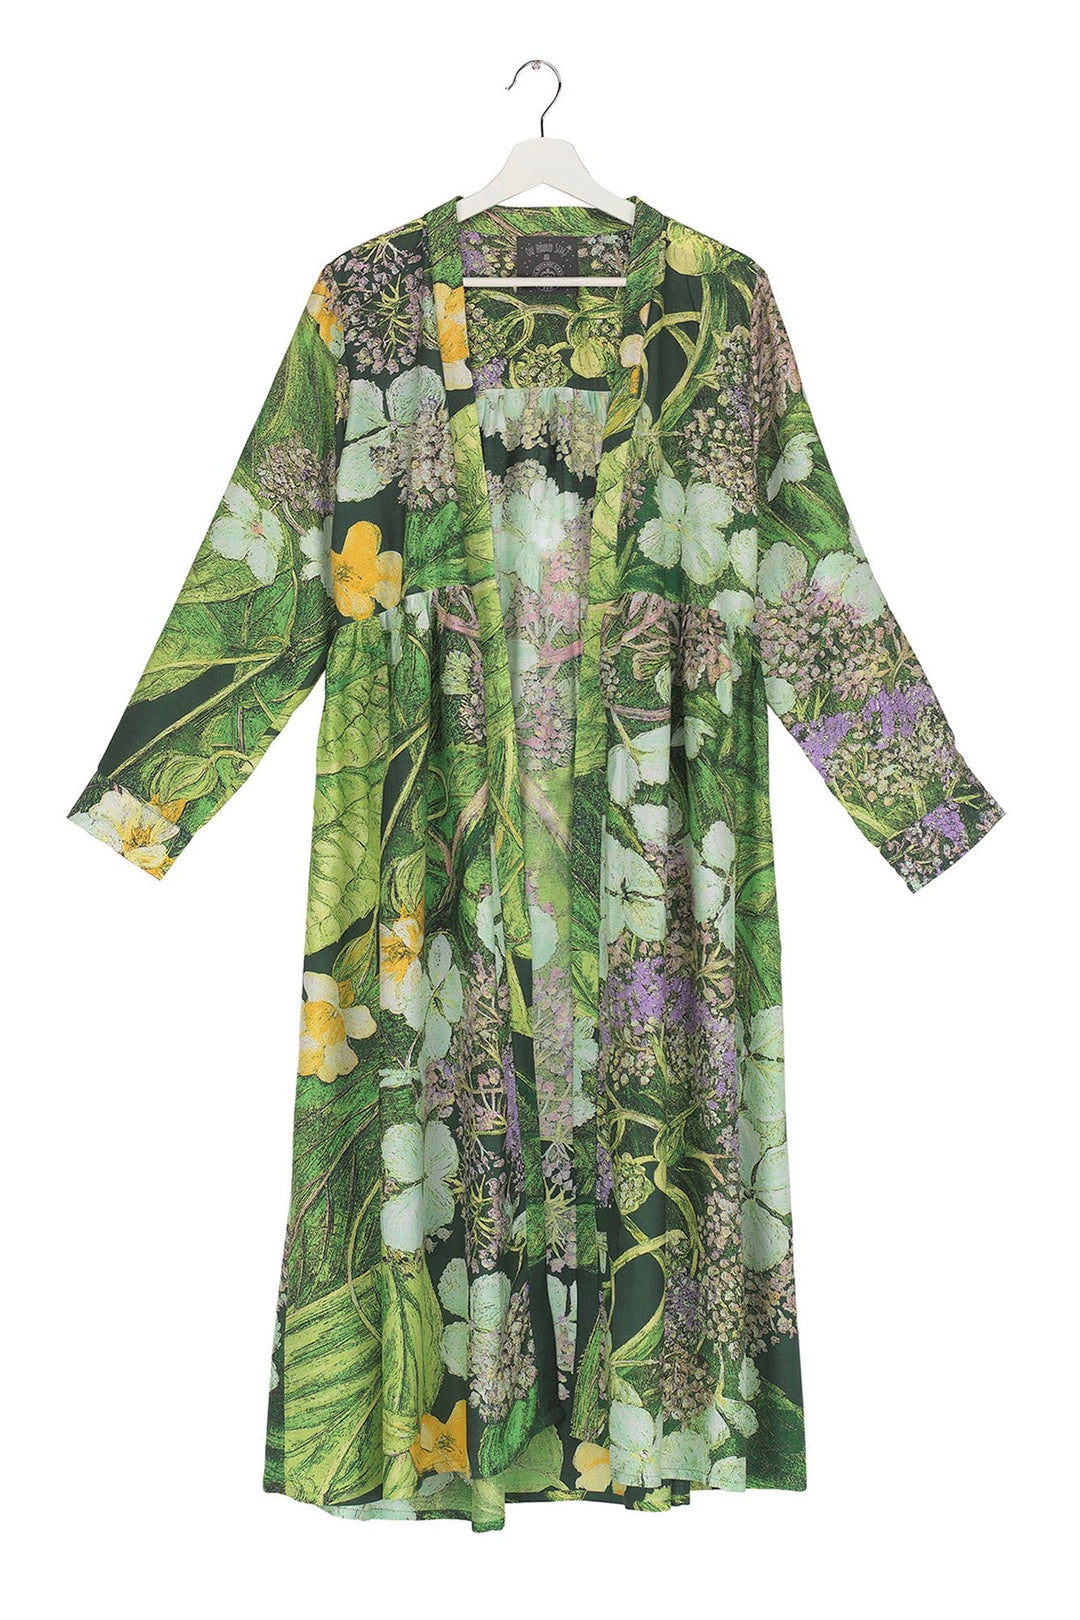 Marianne North Hydrangea Lime Green Duster Coat- This stunning shape is both stylish and versatile, whether you choose to wear our duster coat as a luxurious house coat, as part of a chic ensemble during the day or over a little black dress during the evening.